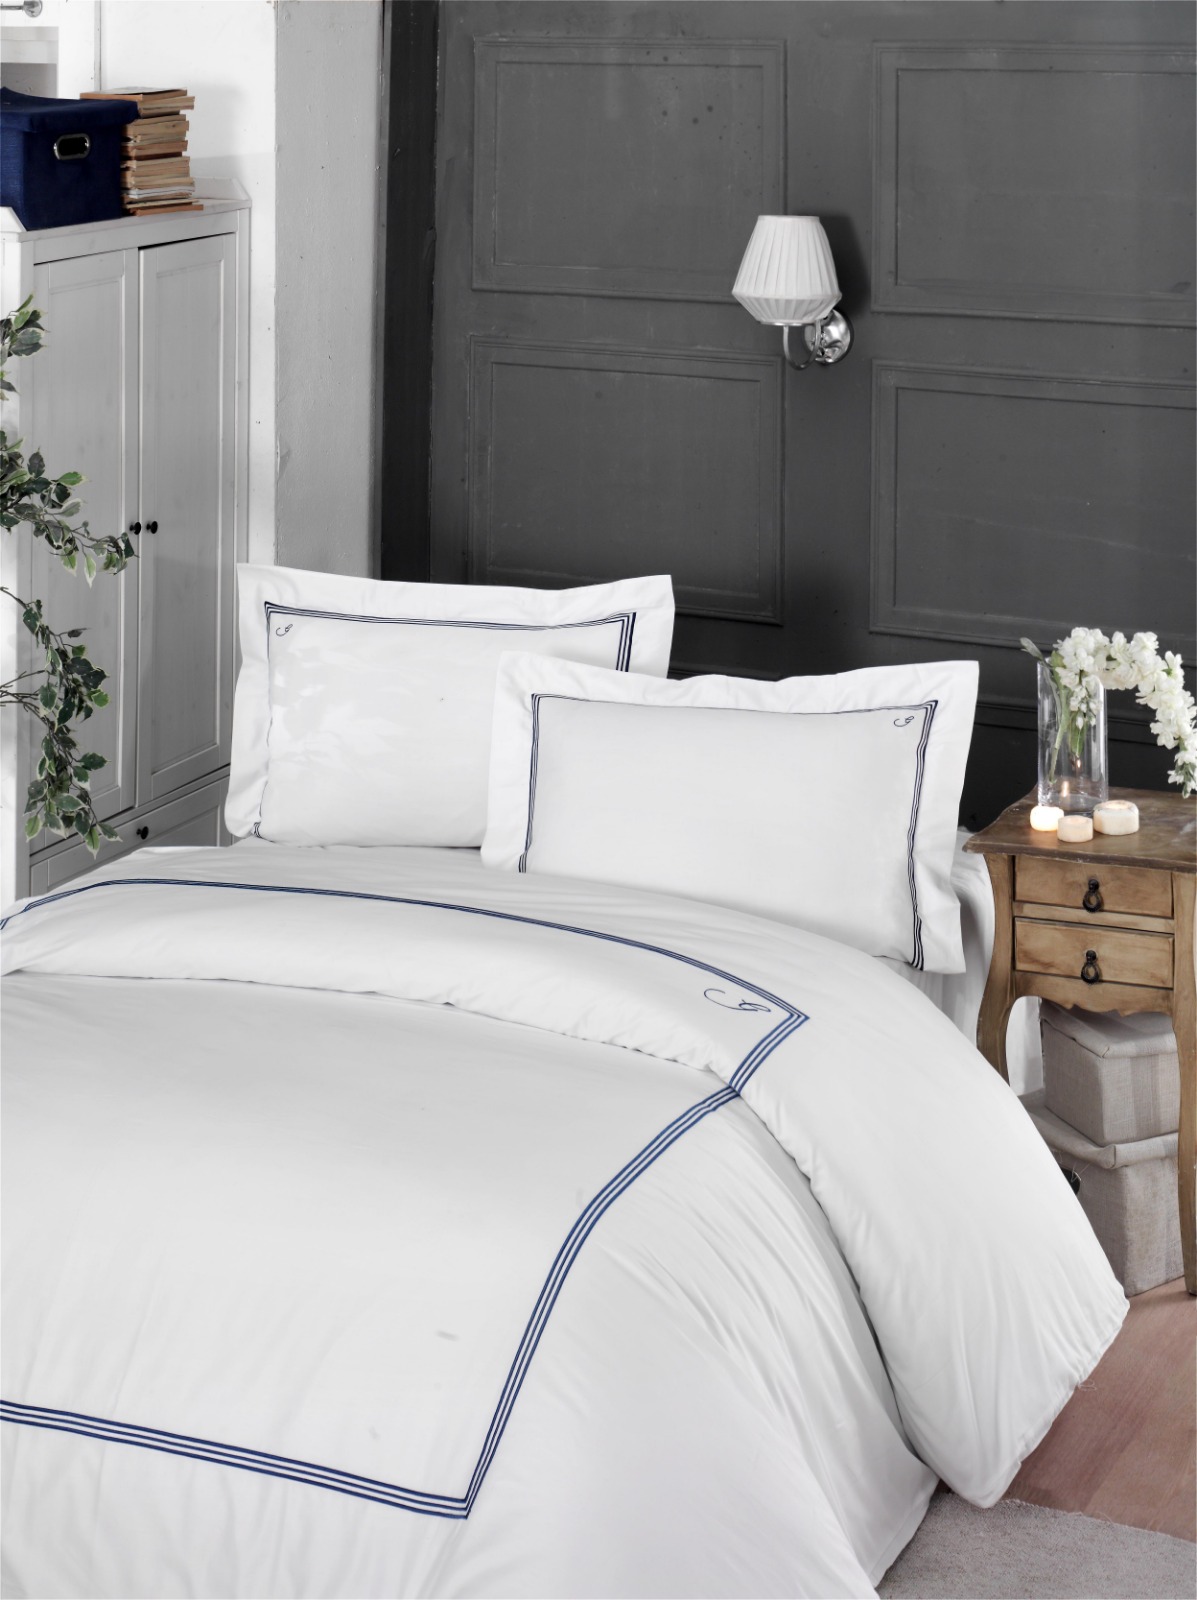 HOTEL BED LINEN SETS WITH NAVY EMBROIDERED